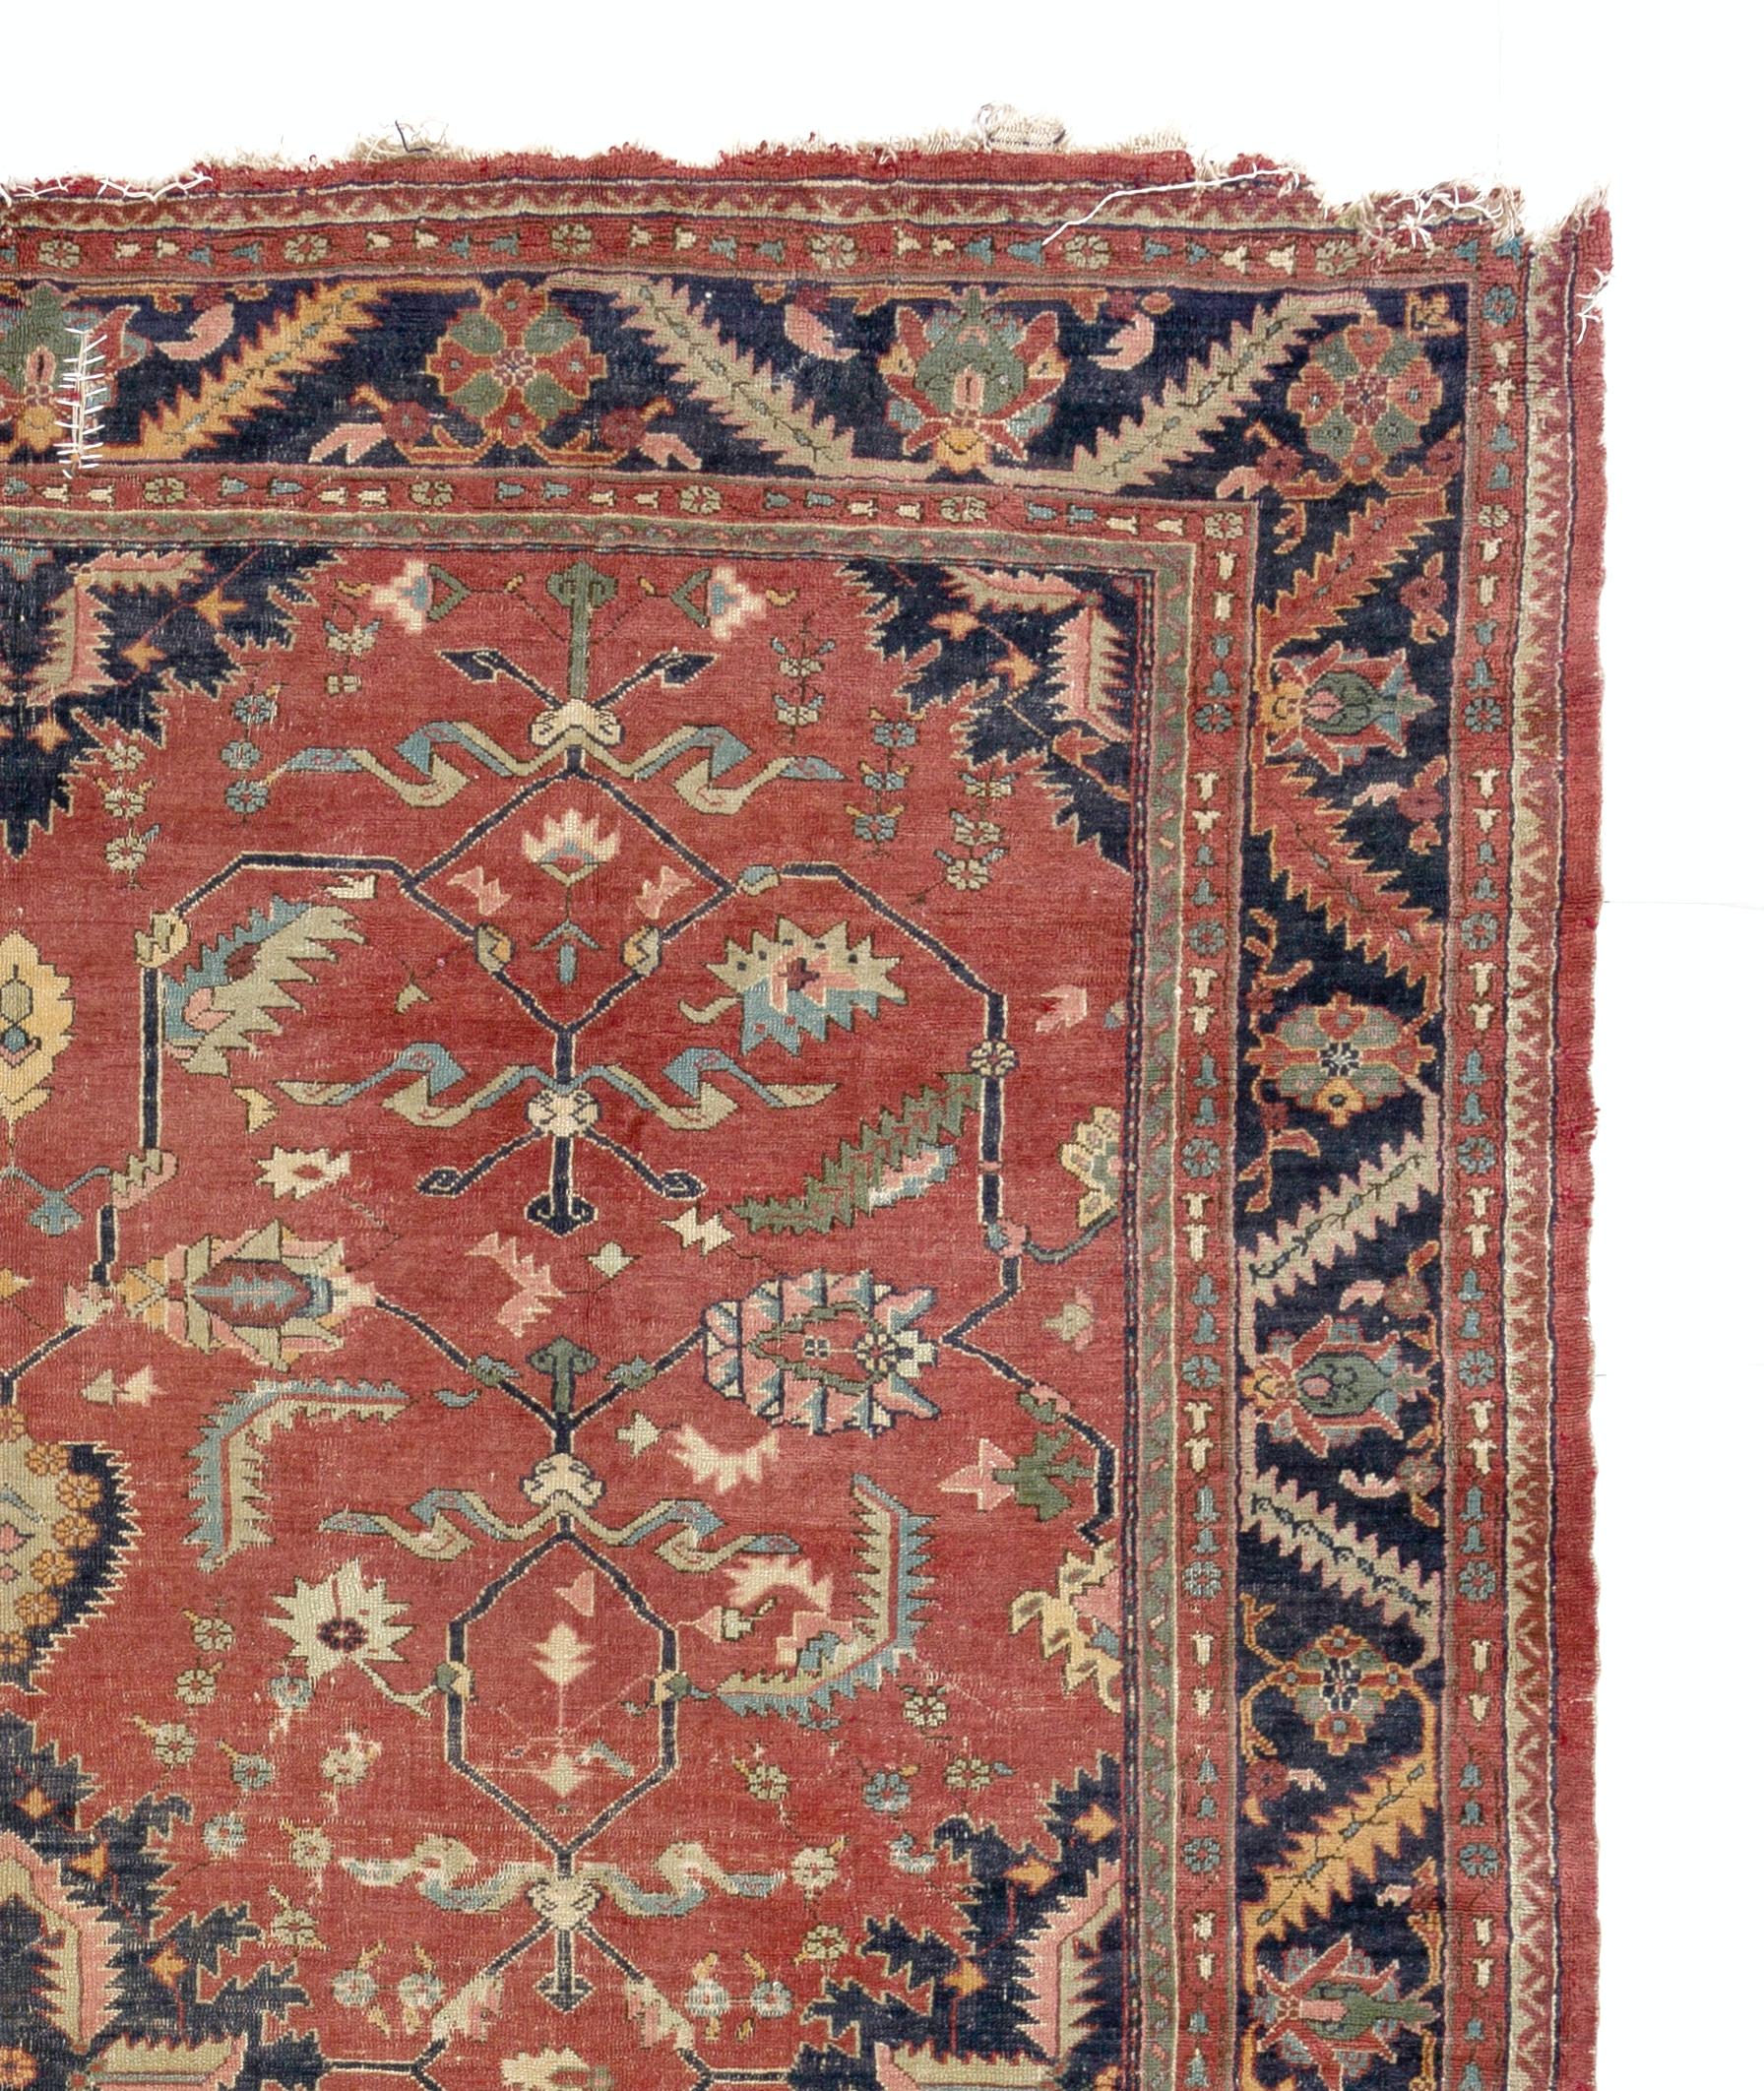 Antique Turkish Oushak rug.
Finely hand-knotted with even medium wool pile on wool foundation. Origin good condition. Sturdy and as clean as a brand new rug (deep washed professionally).